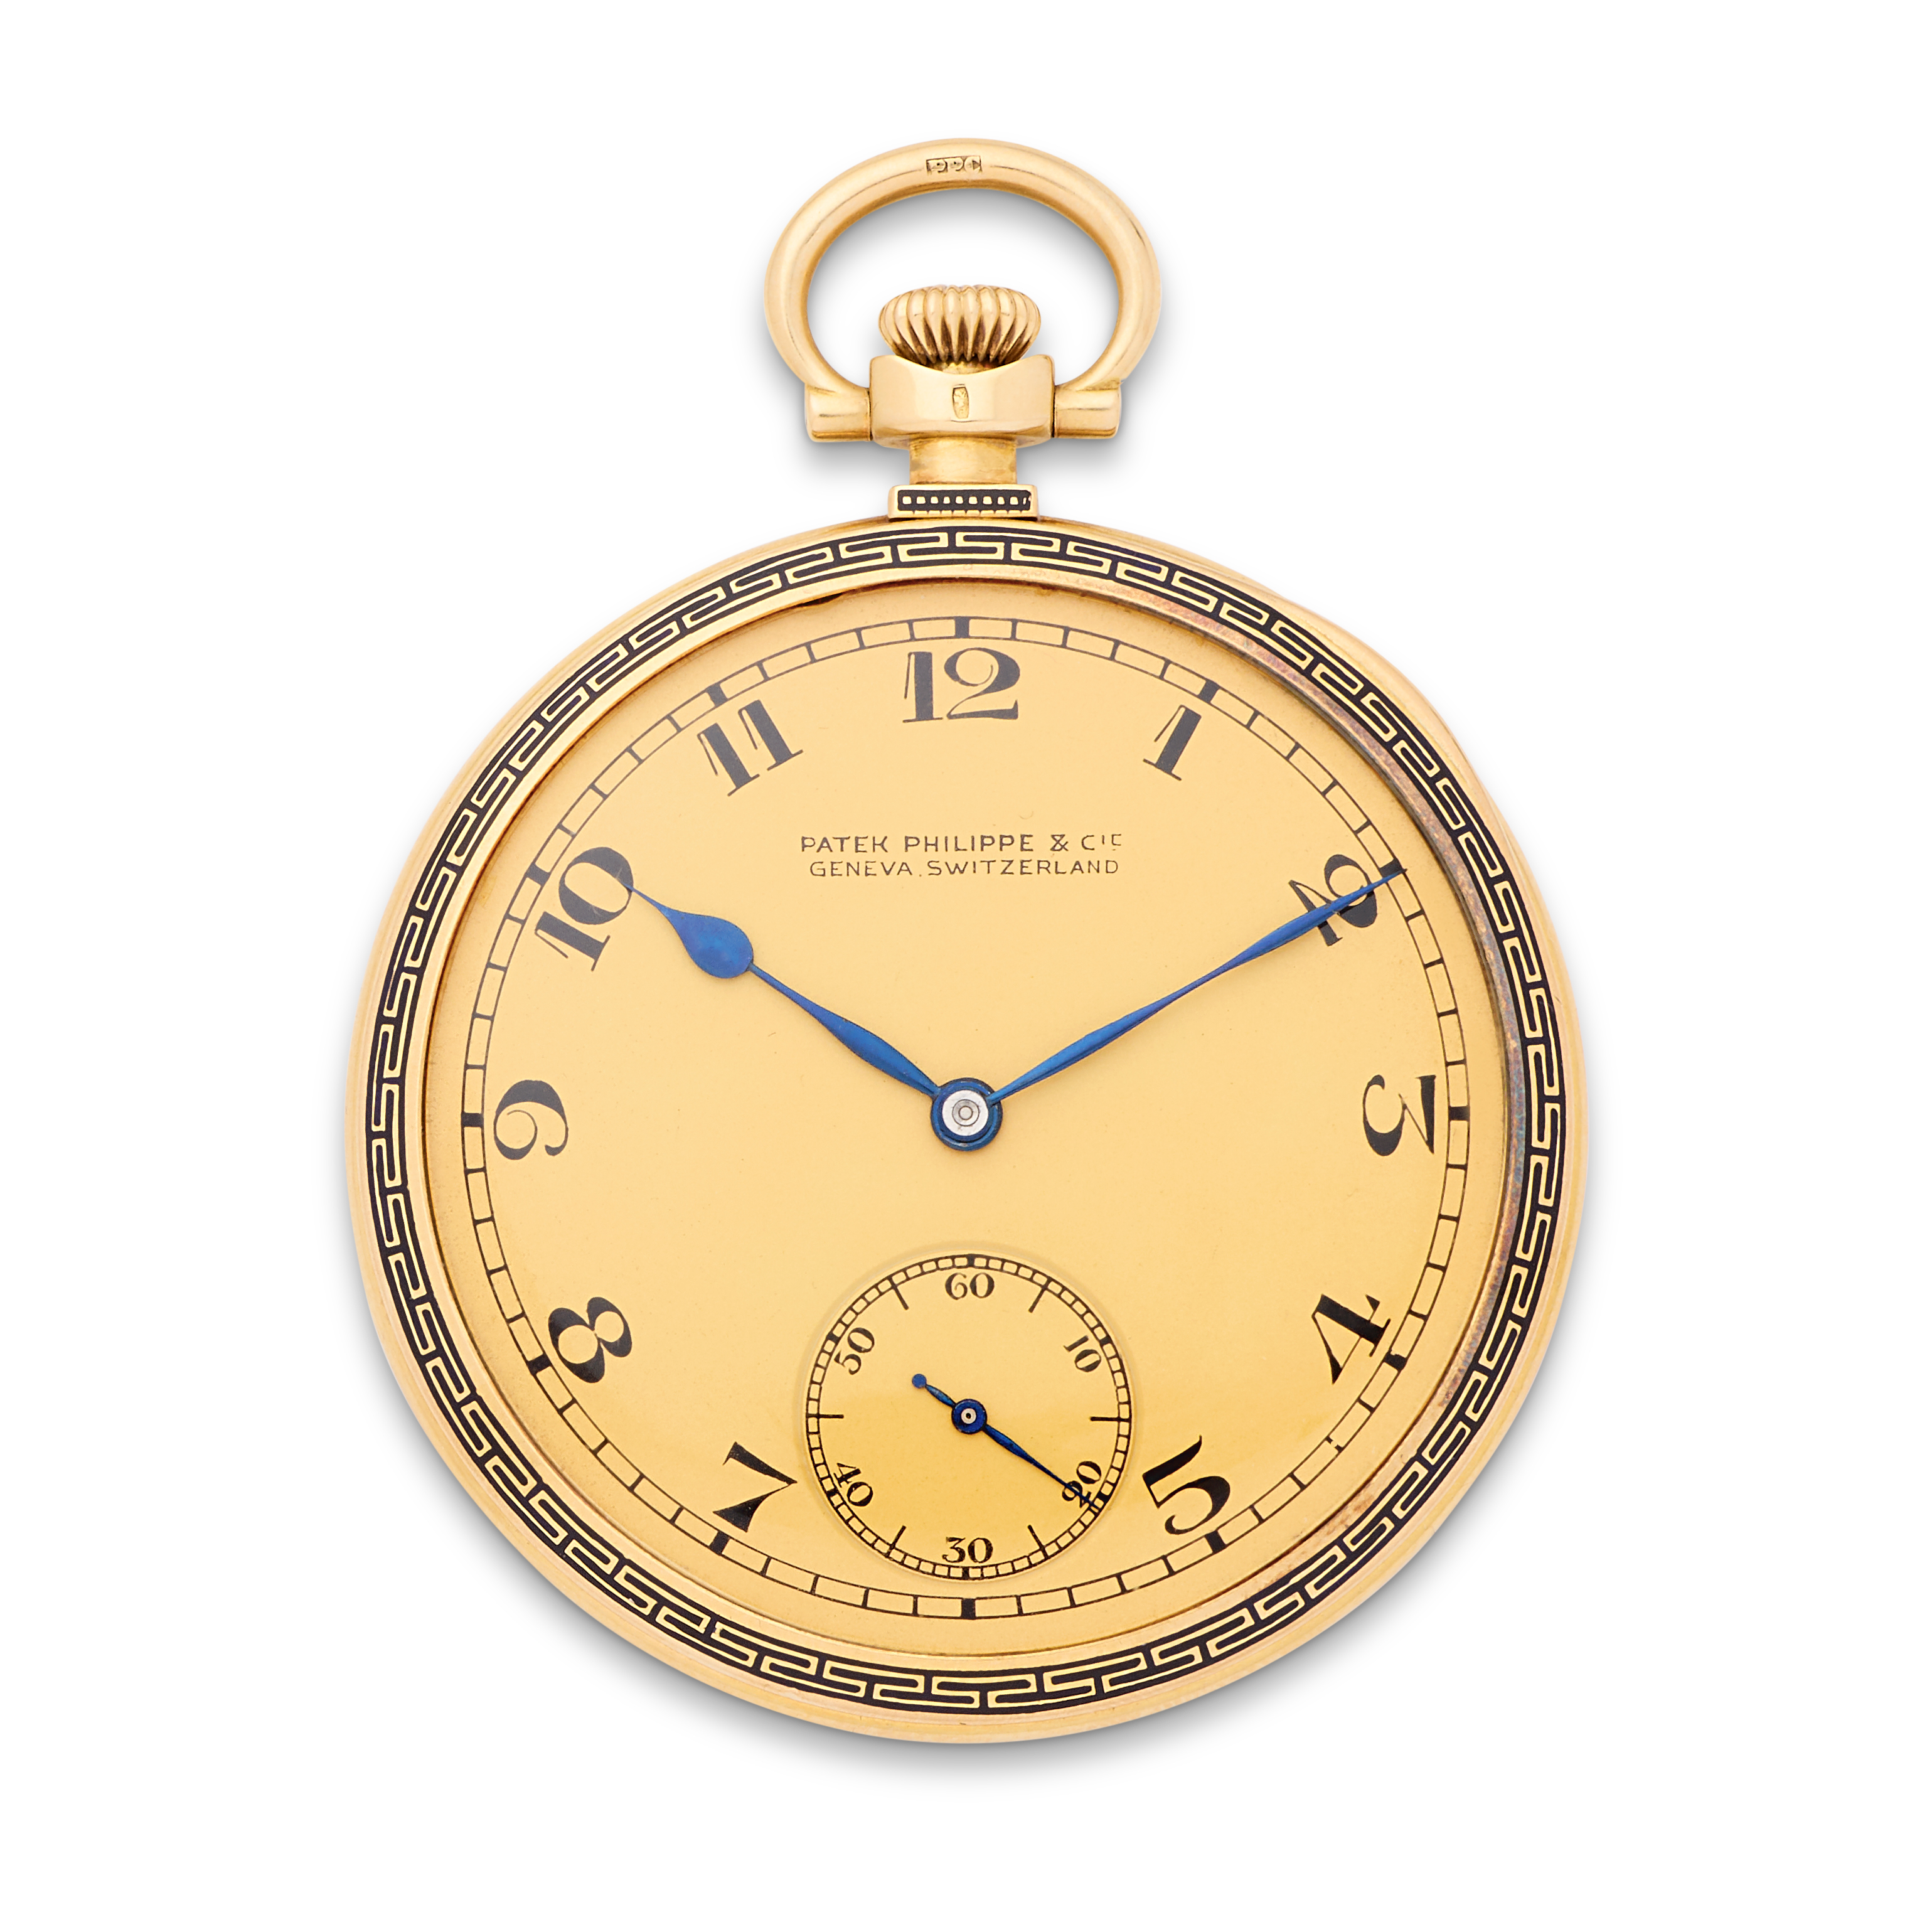 Patek, Philippe & Cie. An 18K gold and enamel keyless wind open face pocket watch retailed by Gr...